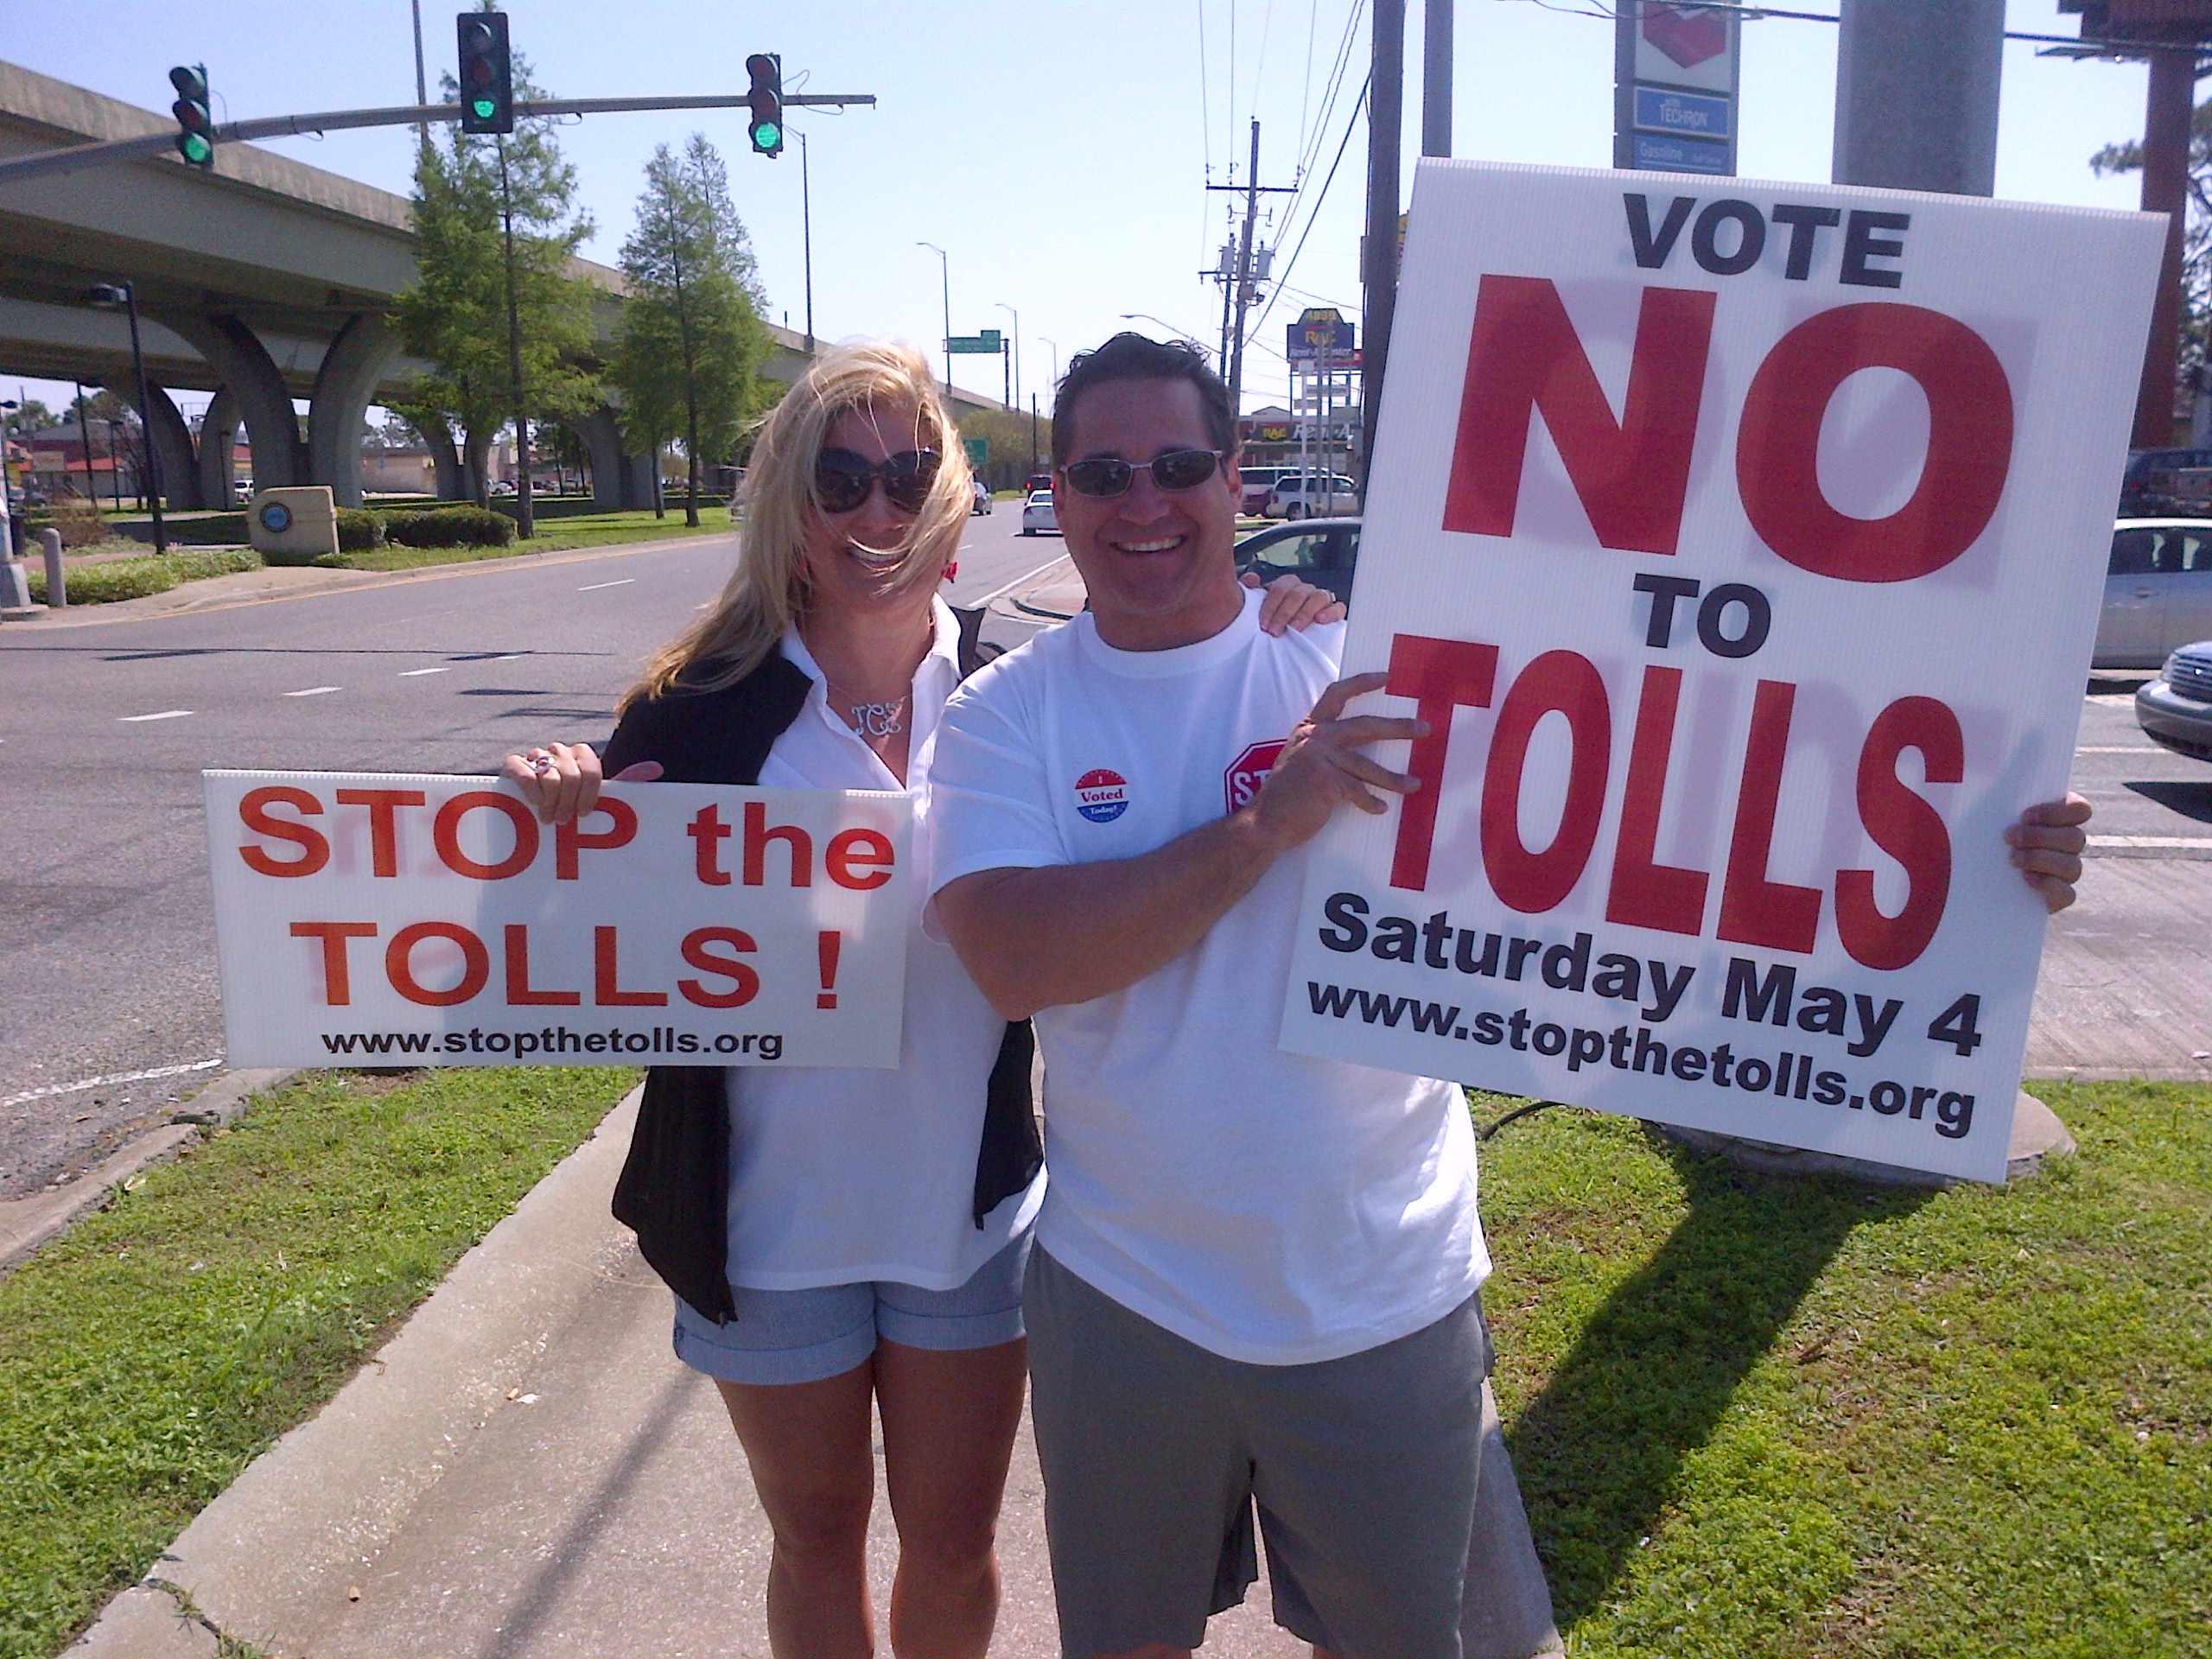 troyandpaige2 shaking signs early voting.jpg